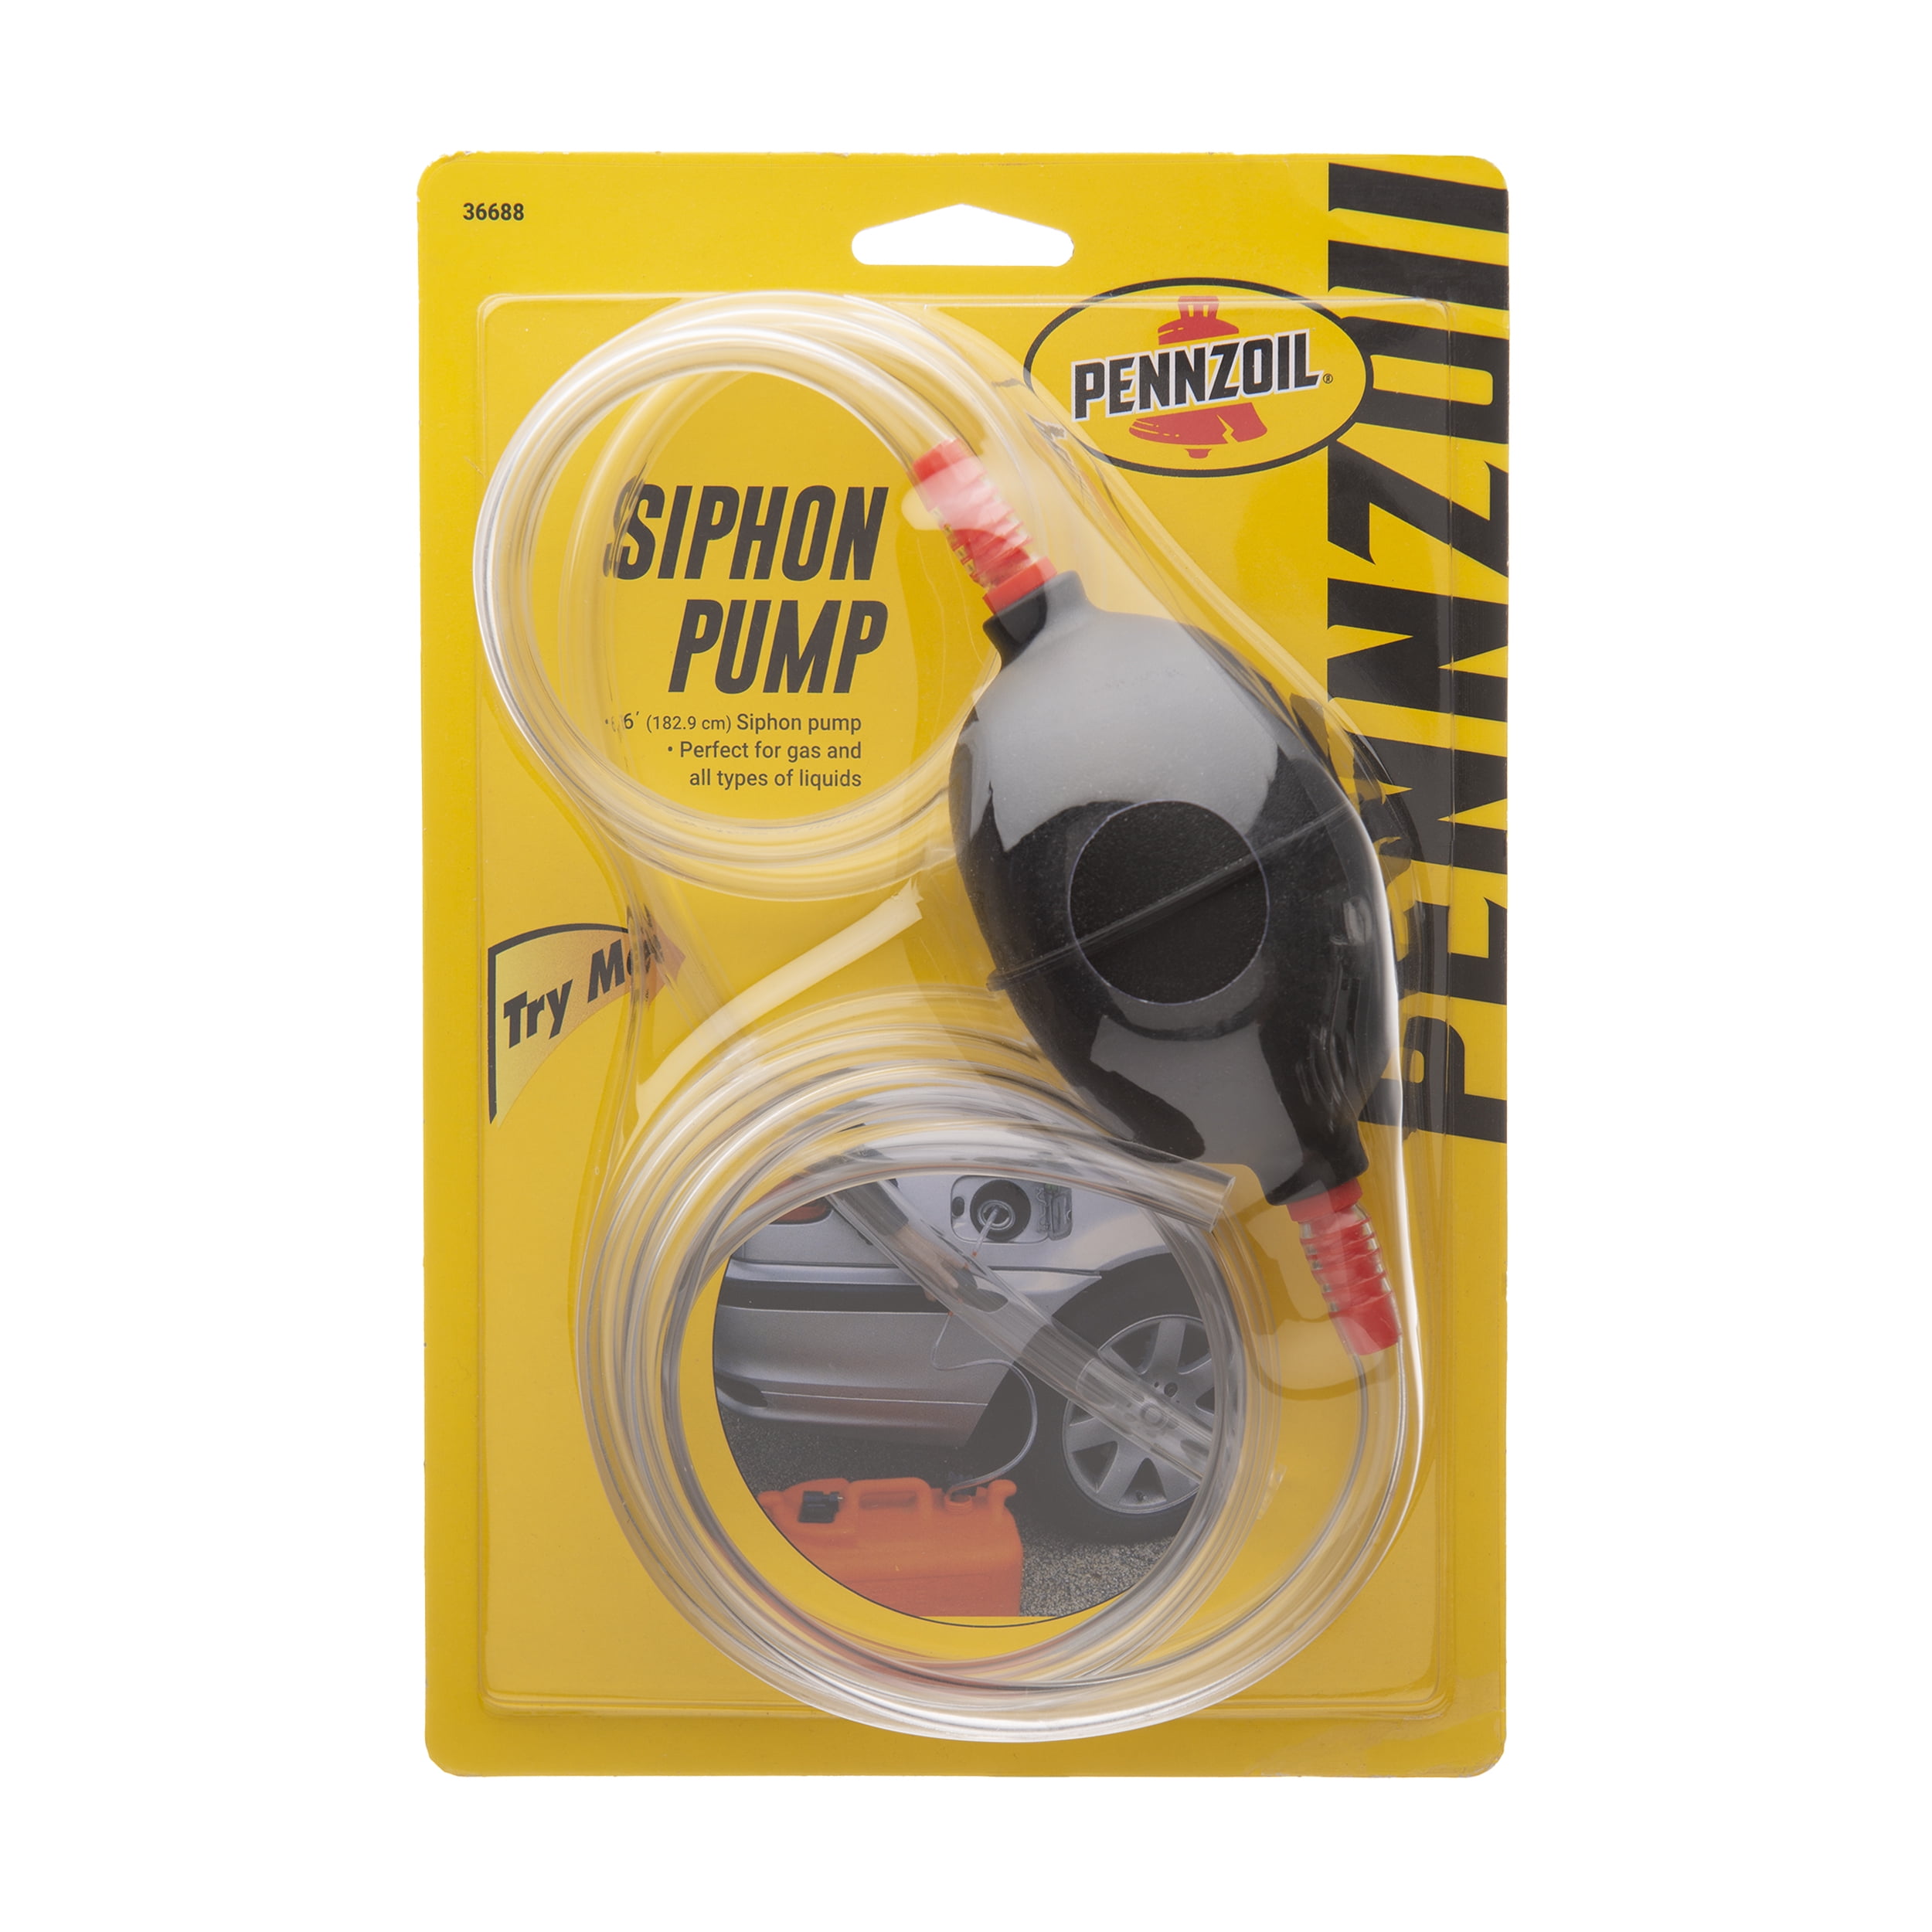 Pennzoil Hand Operated Manual Siphon Pump - Plastic 72 in.